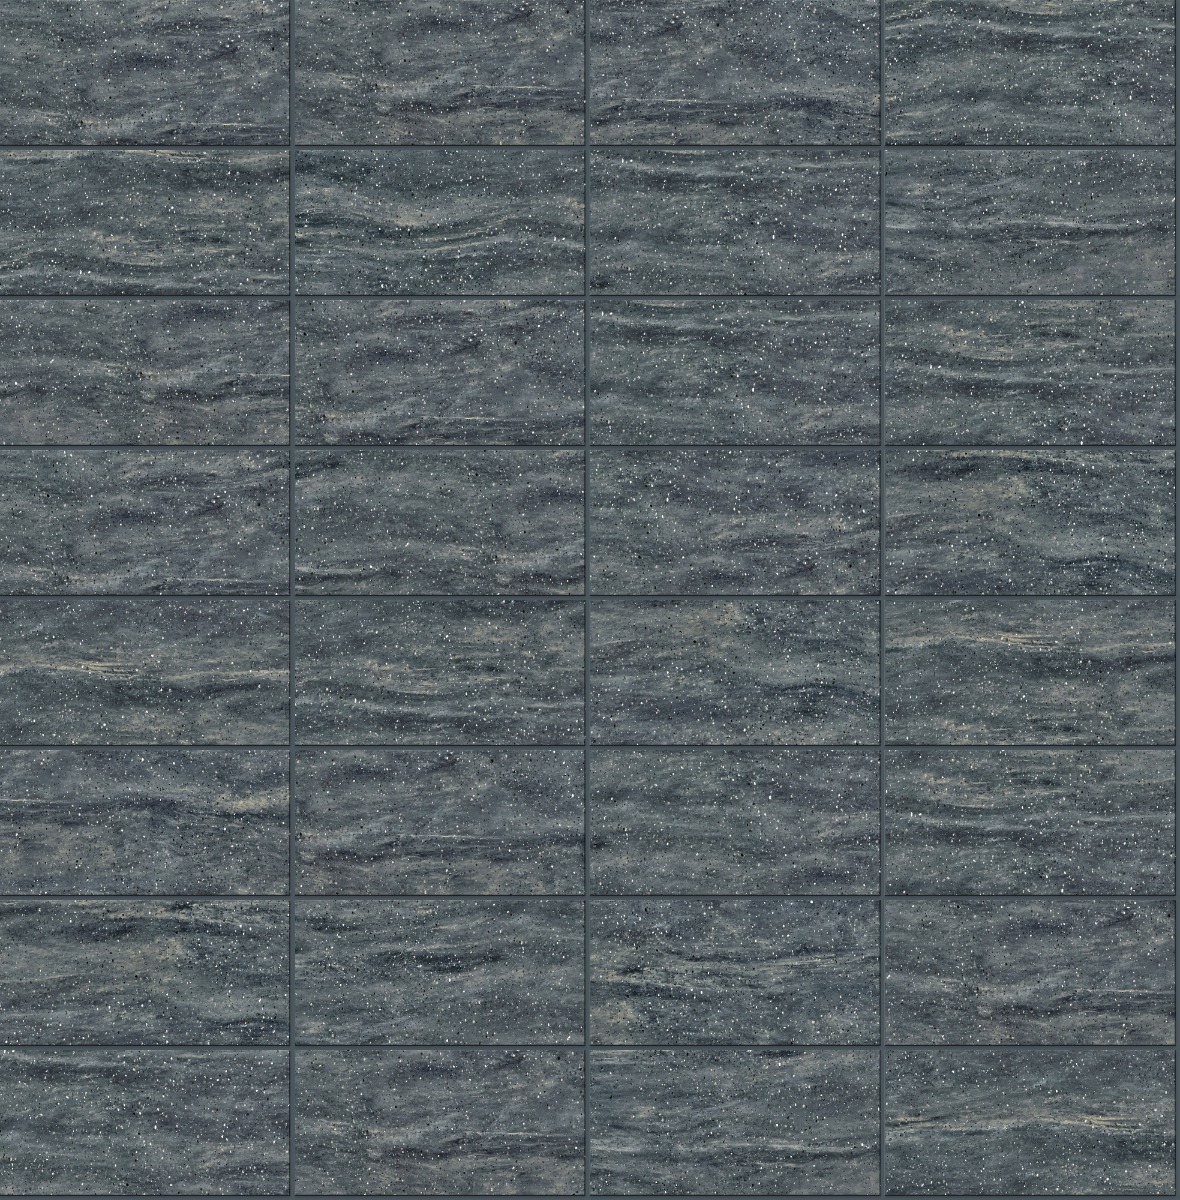 A seamless surfacing texture with bl-206 slate grey units arranged in a Stack pattern